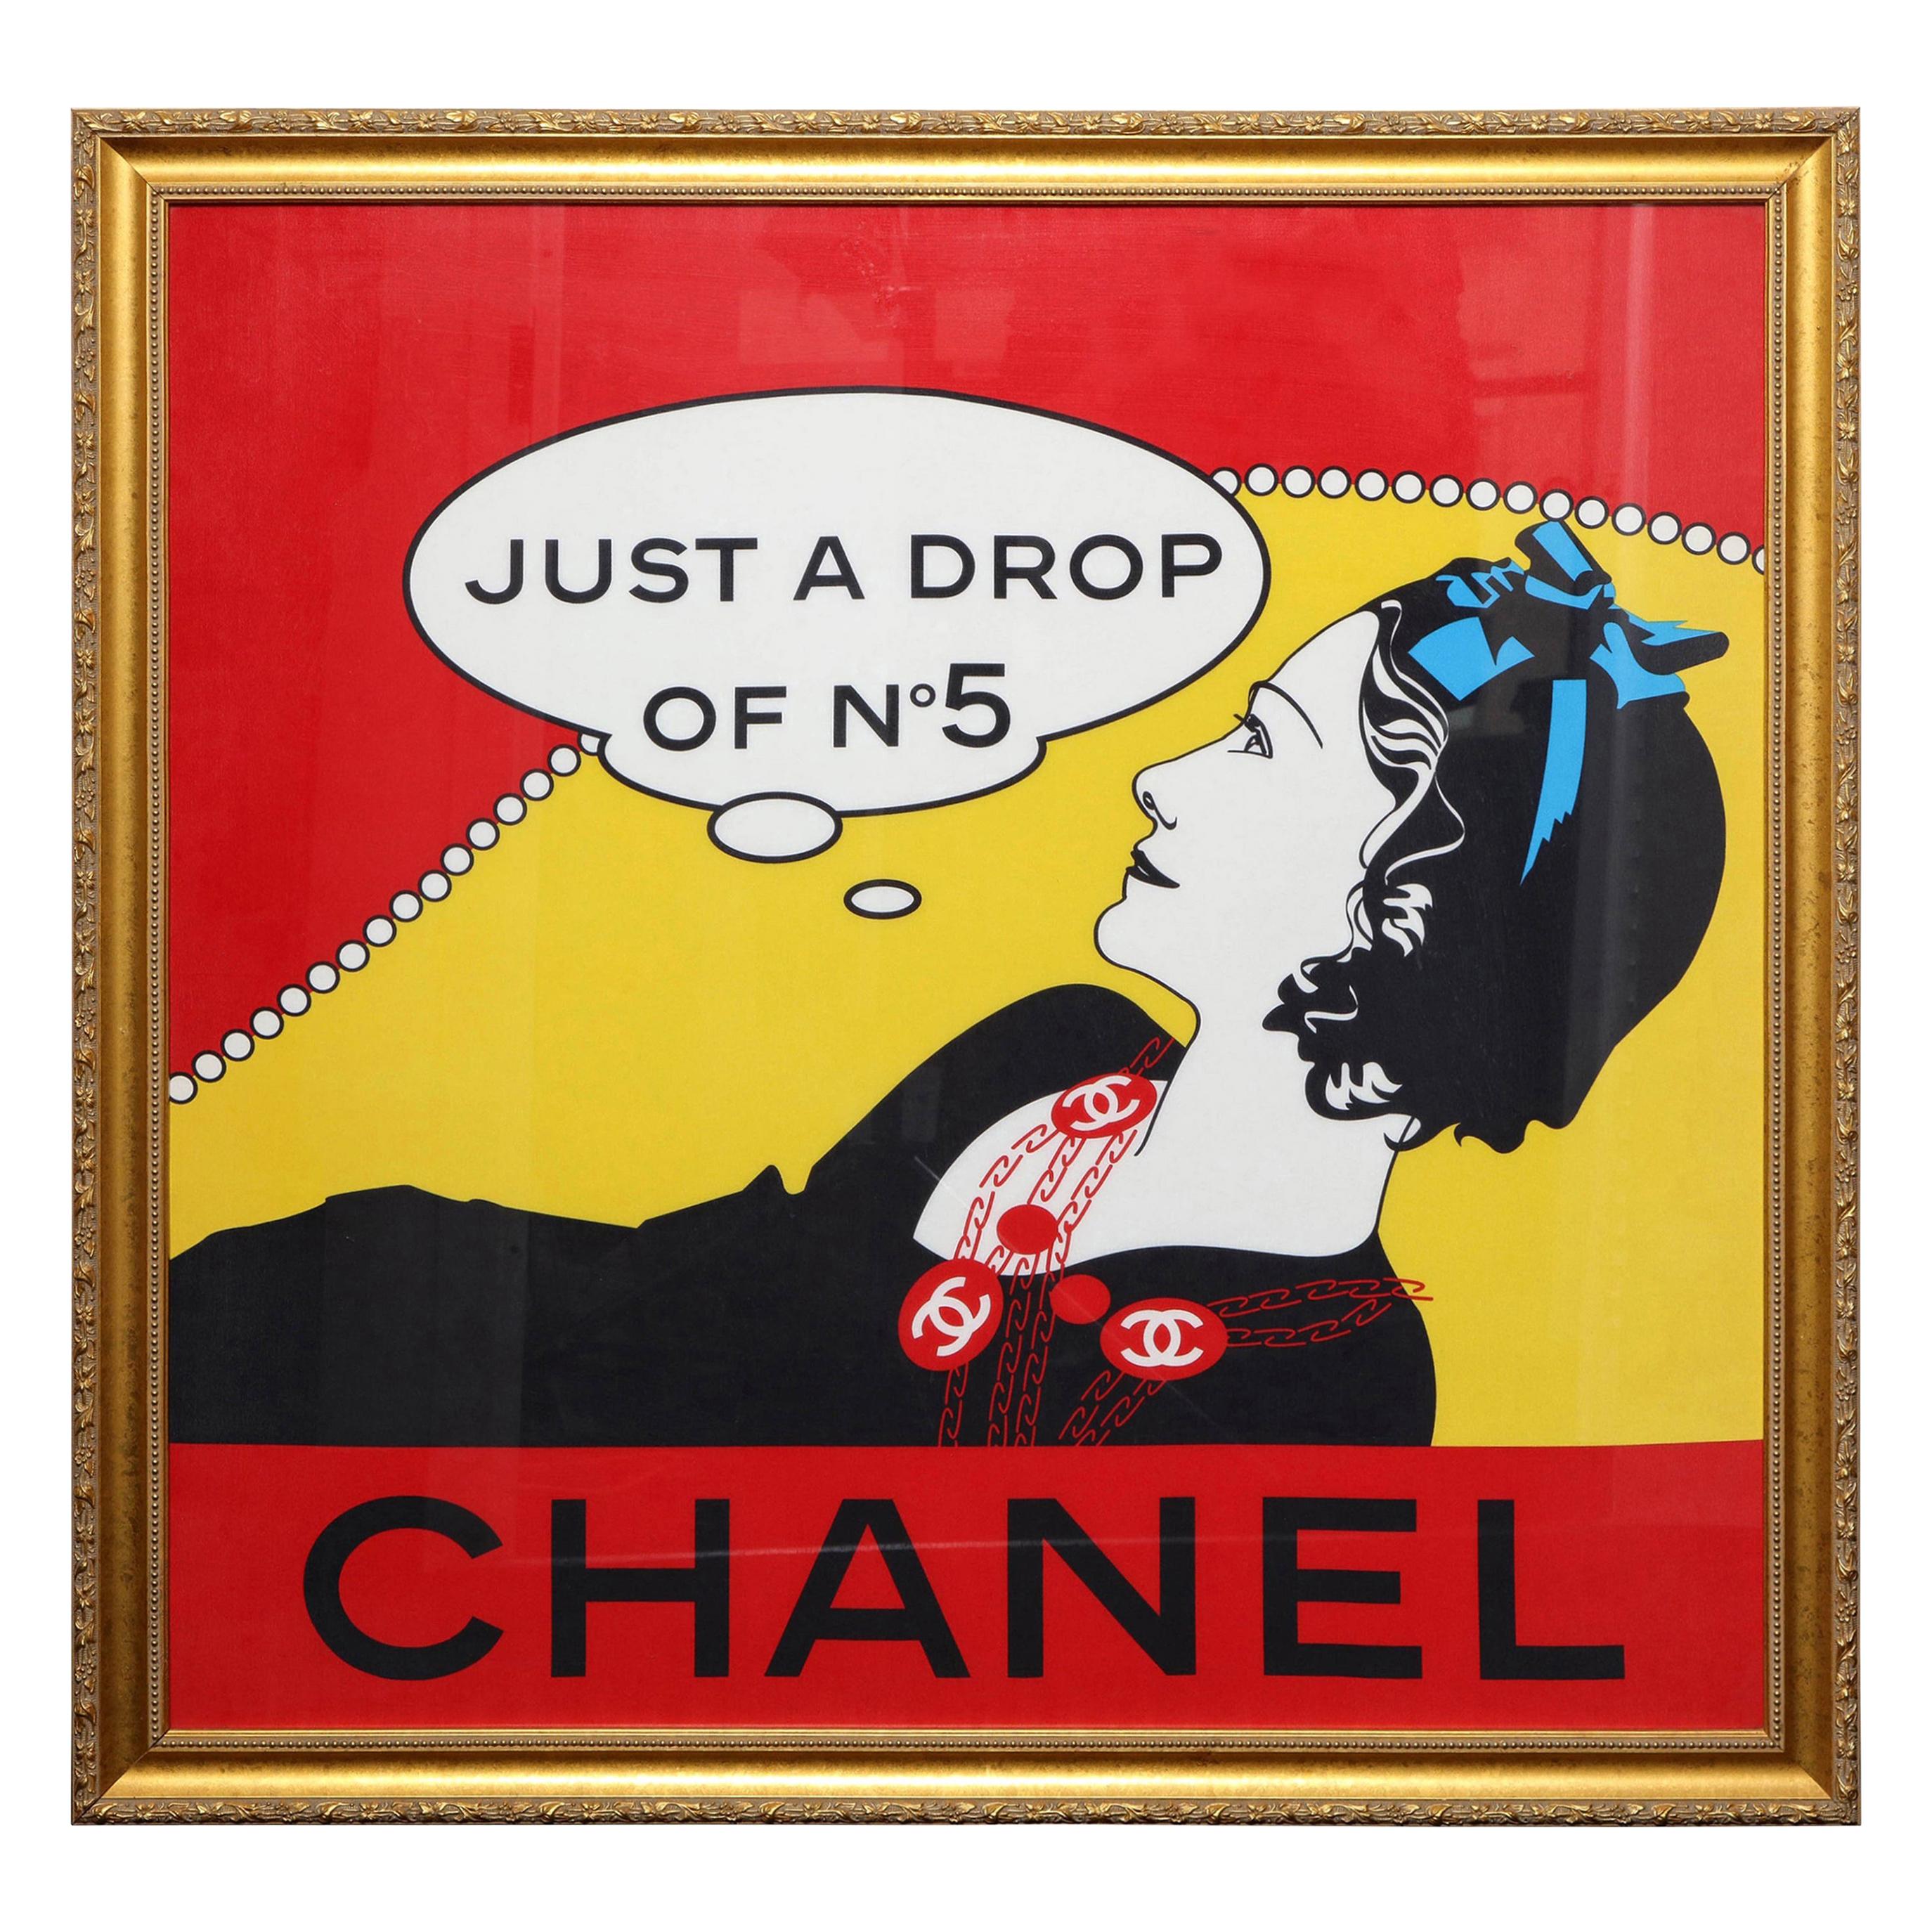 Extremely Rare Chanel "Drop of No.5" Scarf in Gold Frame im Angebot